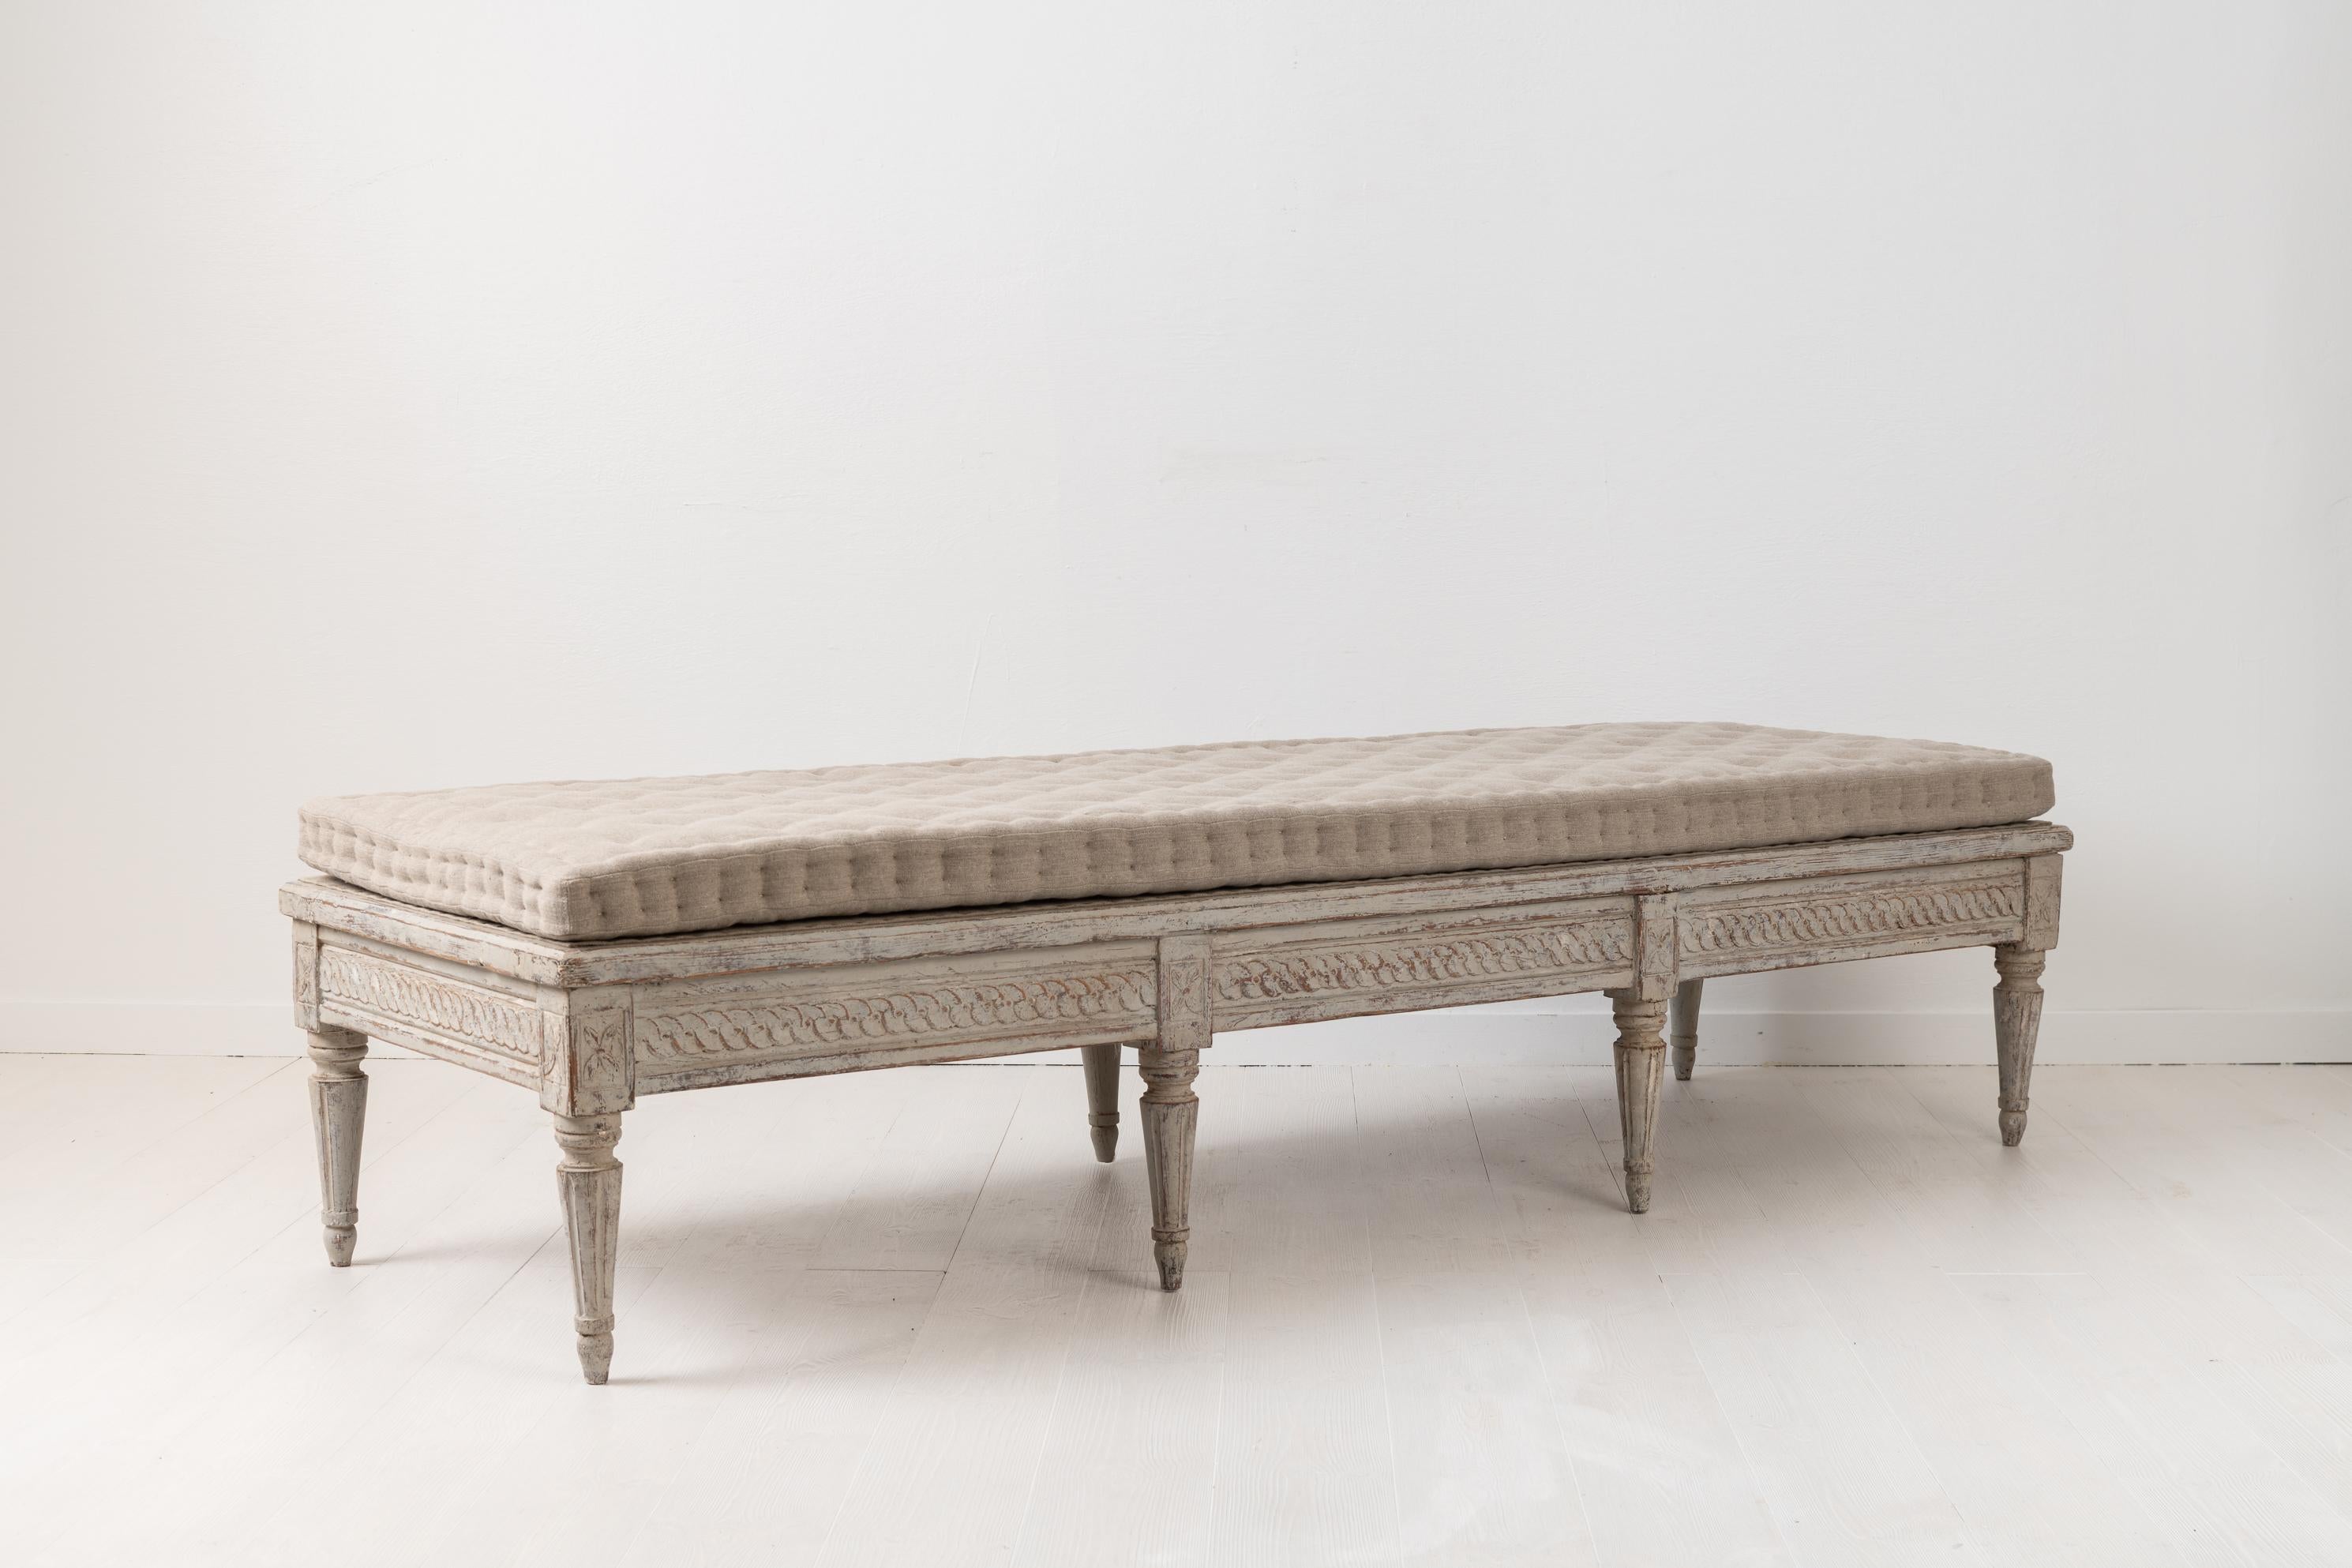 Hand-Crafted Low Antique Swedish Bench with White Distressed Paint